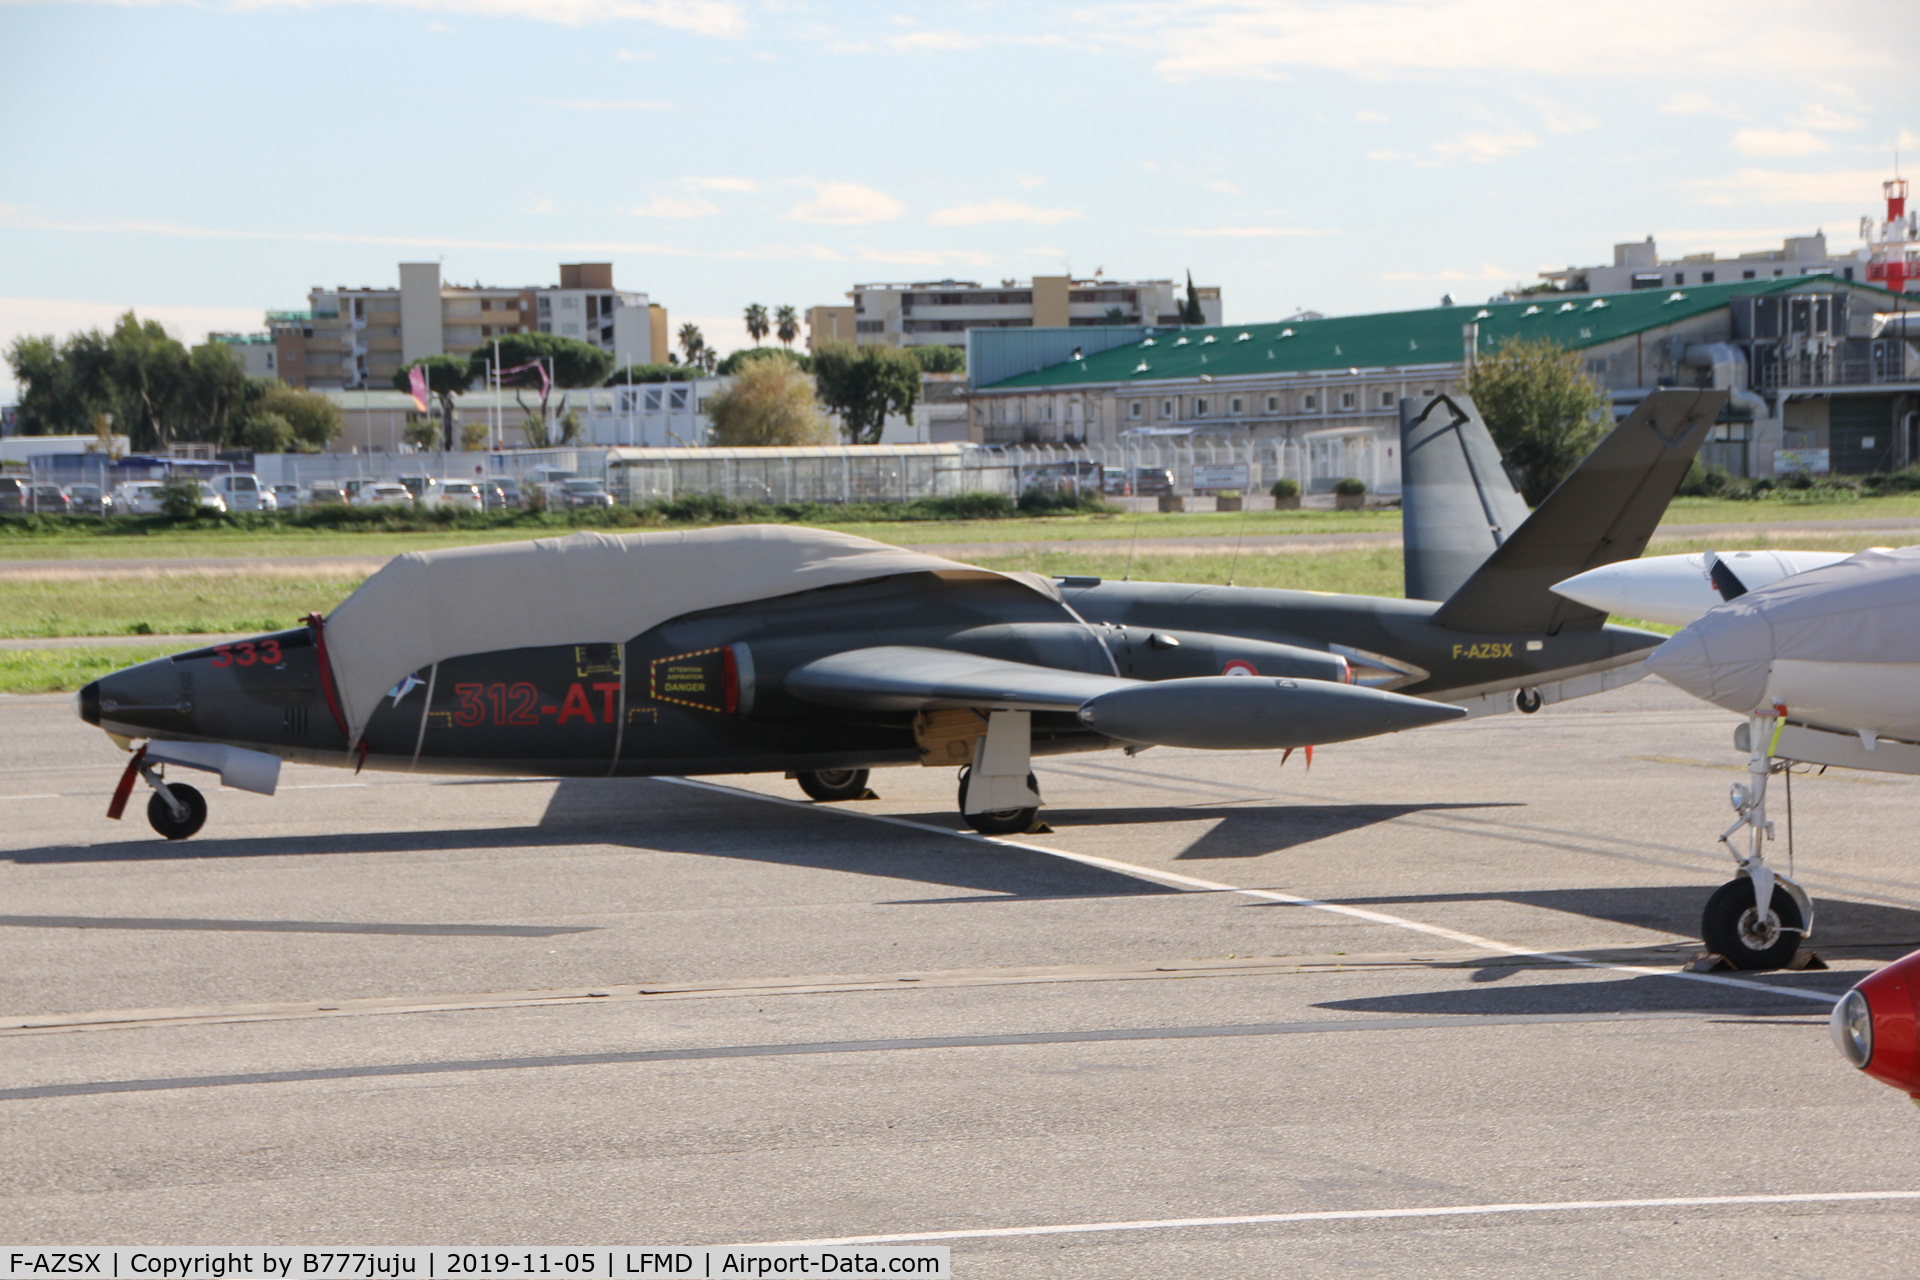 F-AZSX, Fouga CM-170 Magister C/N 533, at Cannes